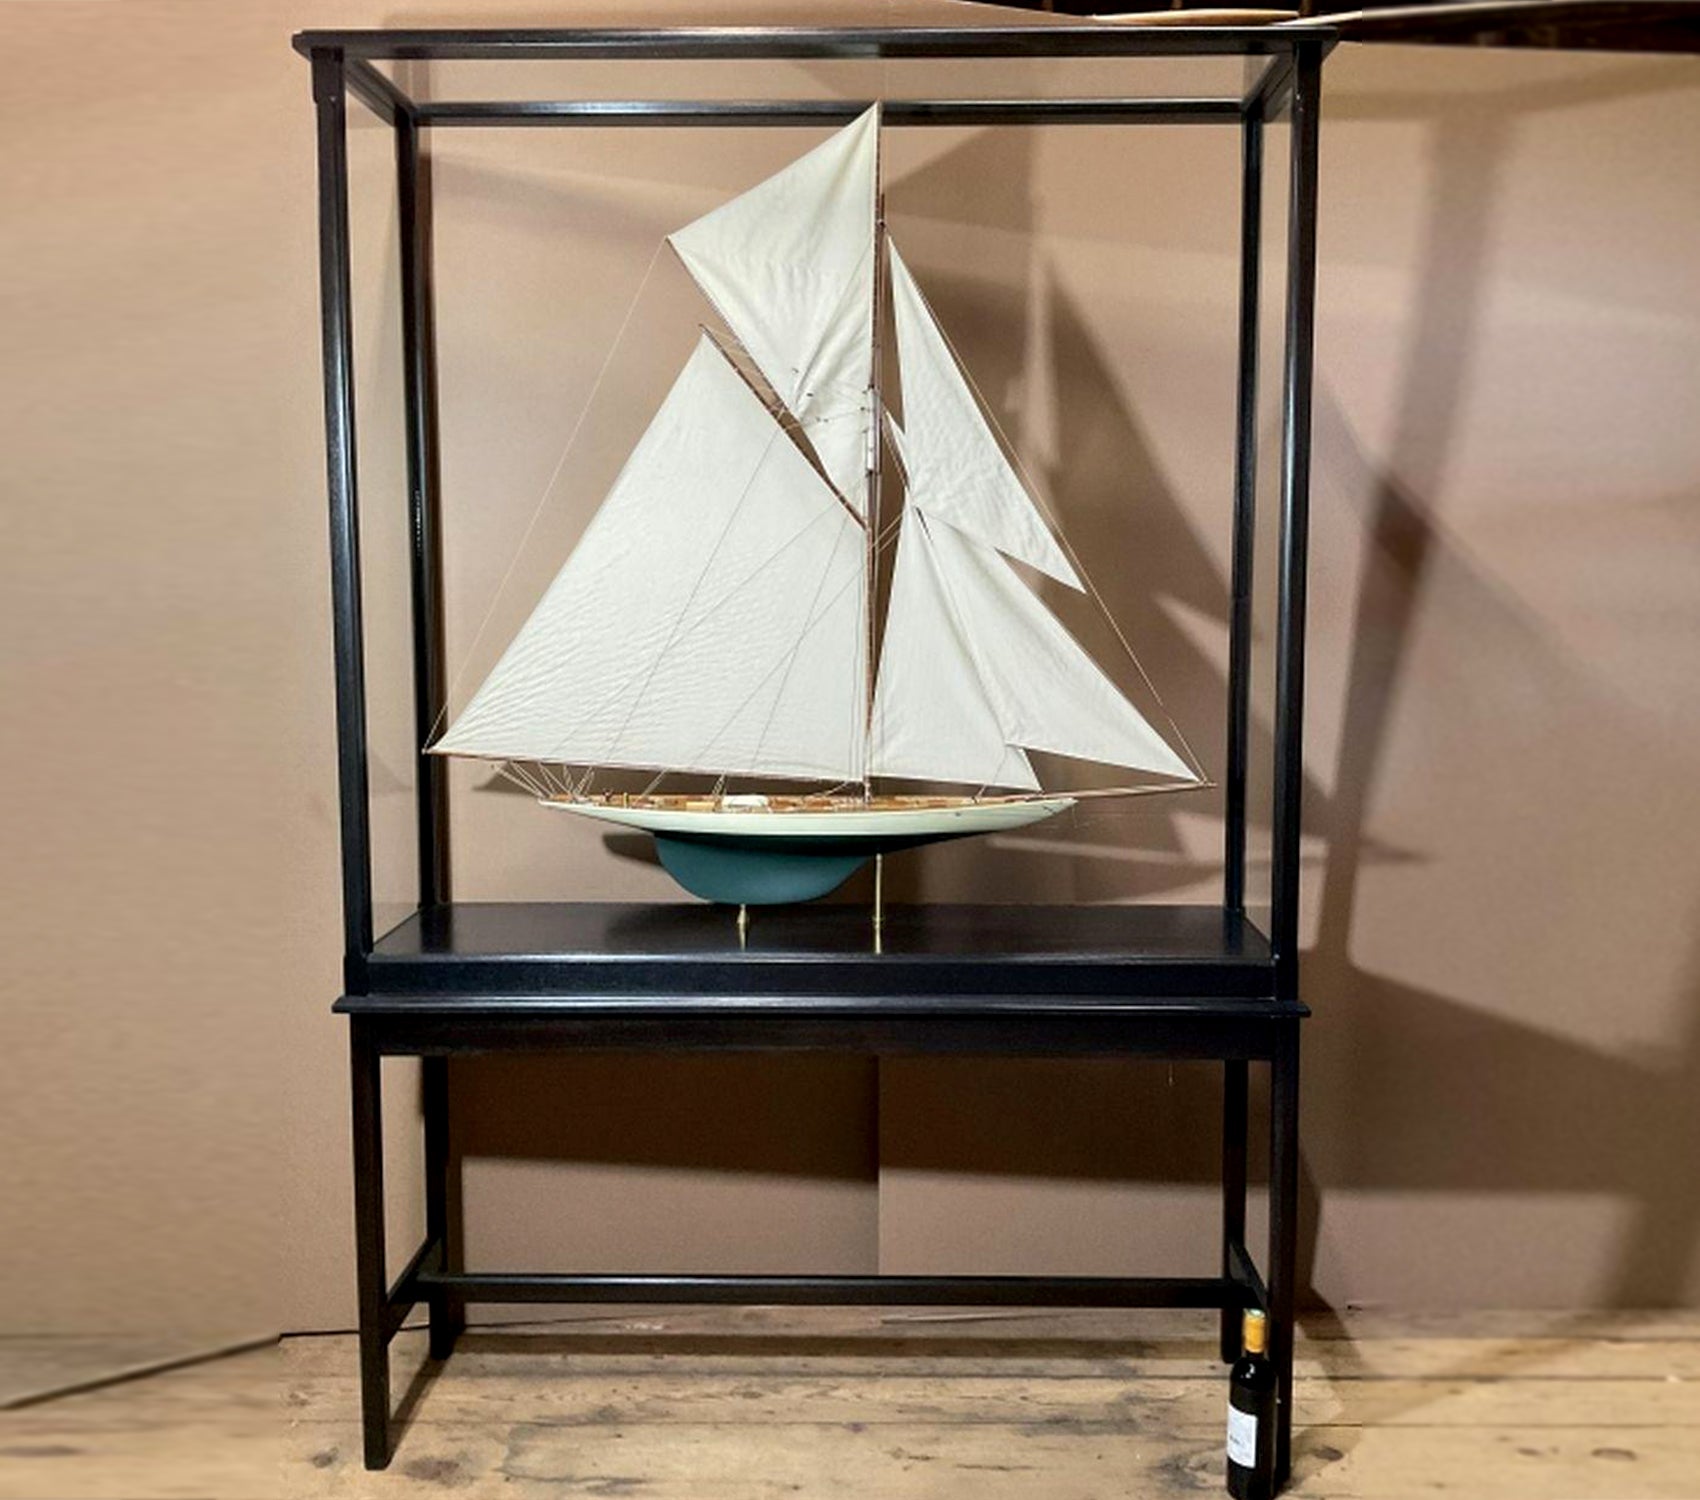 Large Cased Model Of America's Cup Yacht Defender - Lannan Gallery